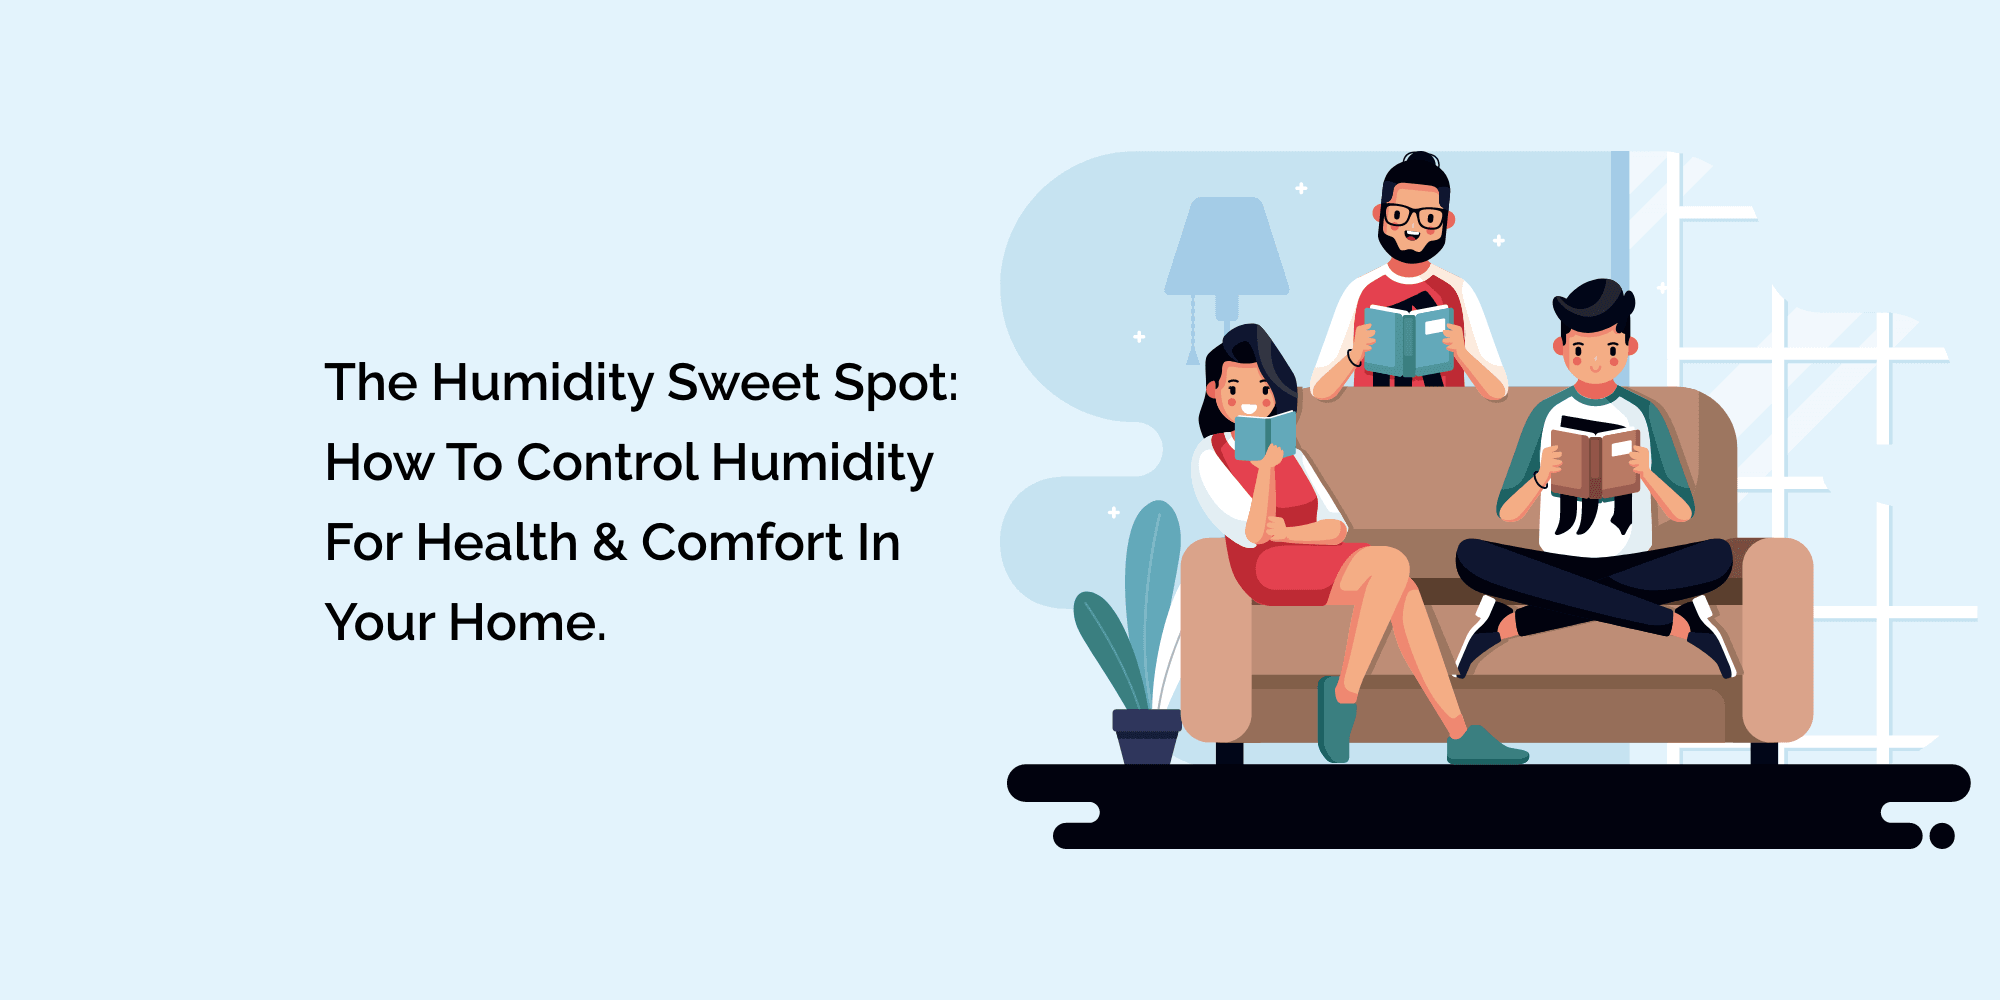 The Humidity Sweet Spot: How to Control Humidity for Health & Comfort in Your Home.